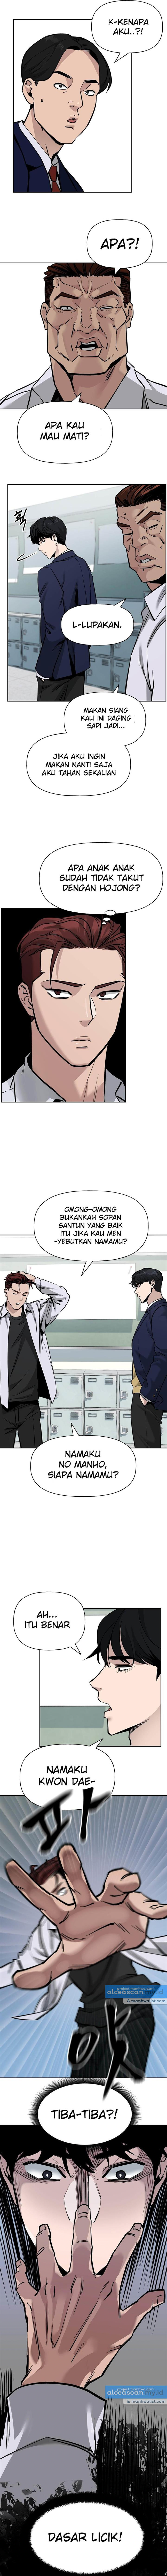 The Bully In Charge Chapter 3